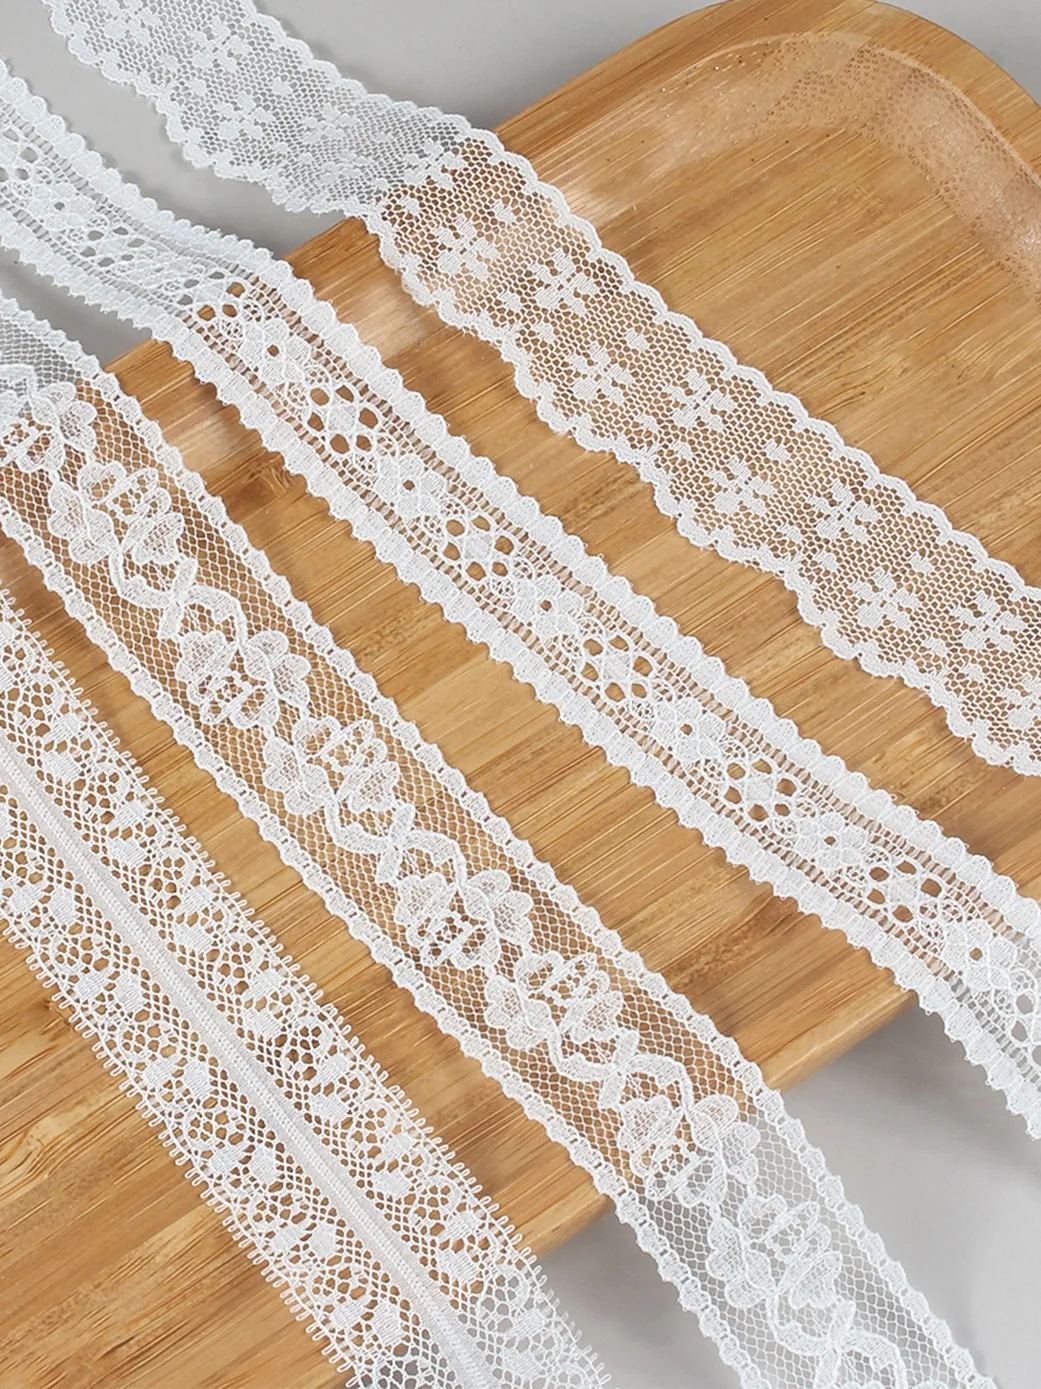 5Yards White Lace Trim Ribbon DIY Embroidered for Sewing Decoration Fabric  Lace Ribbon Tape Handmade Craft Materials Net Ribbons